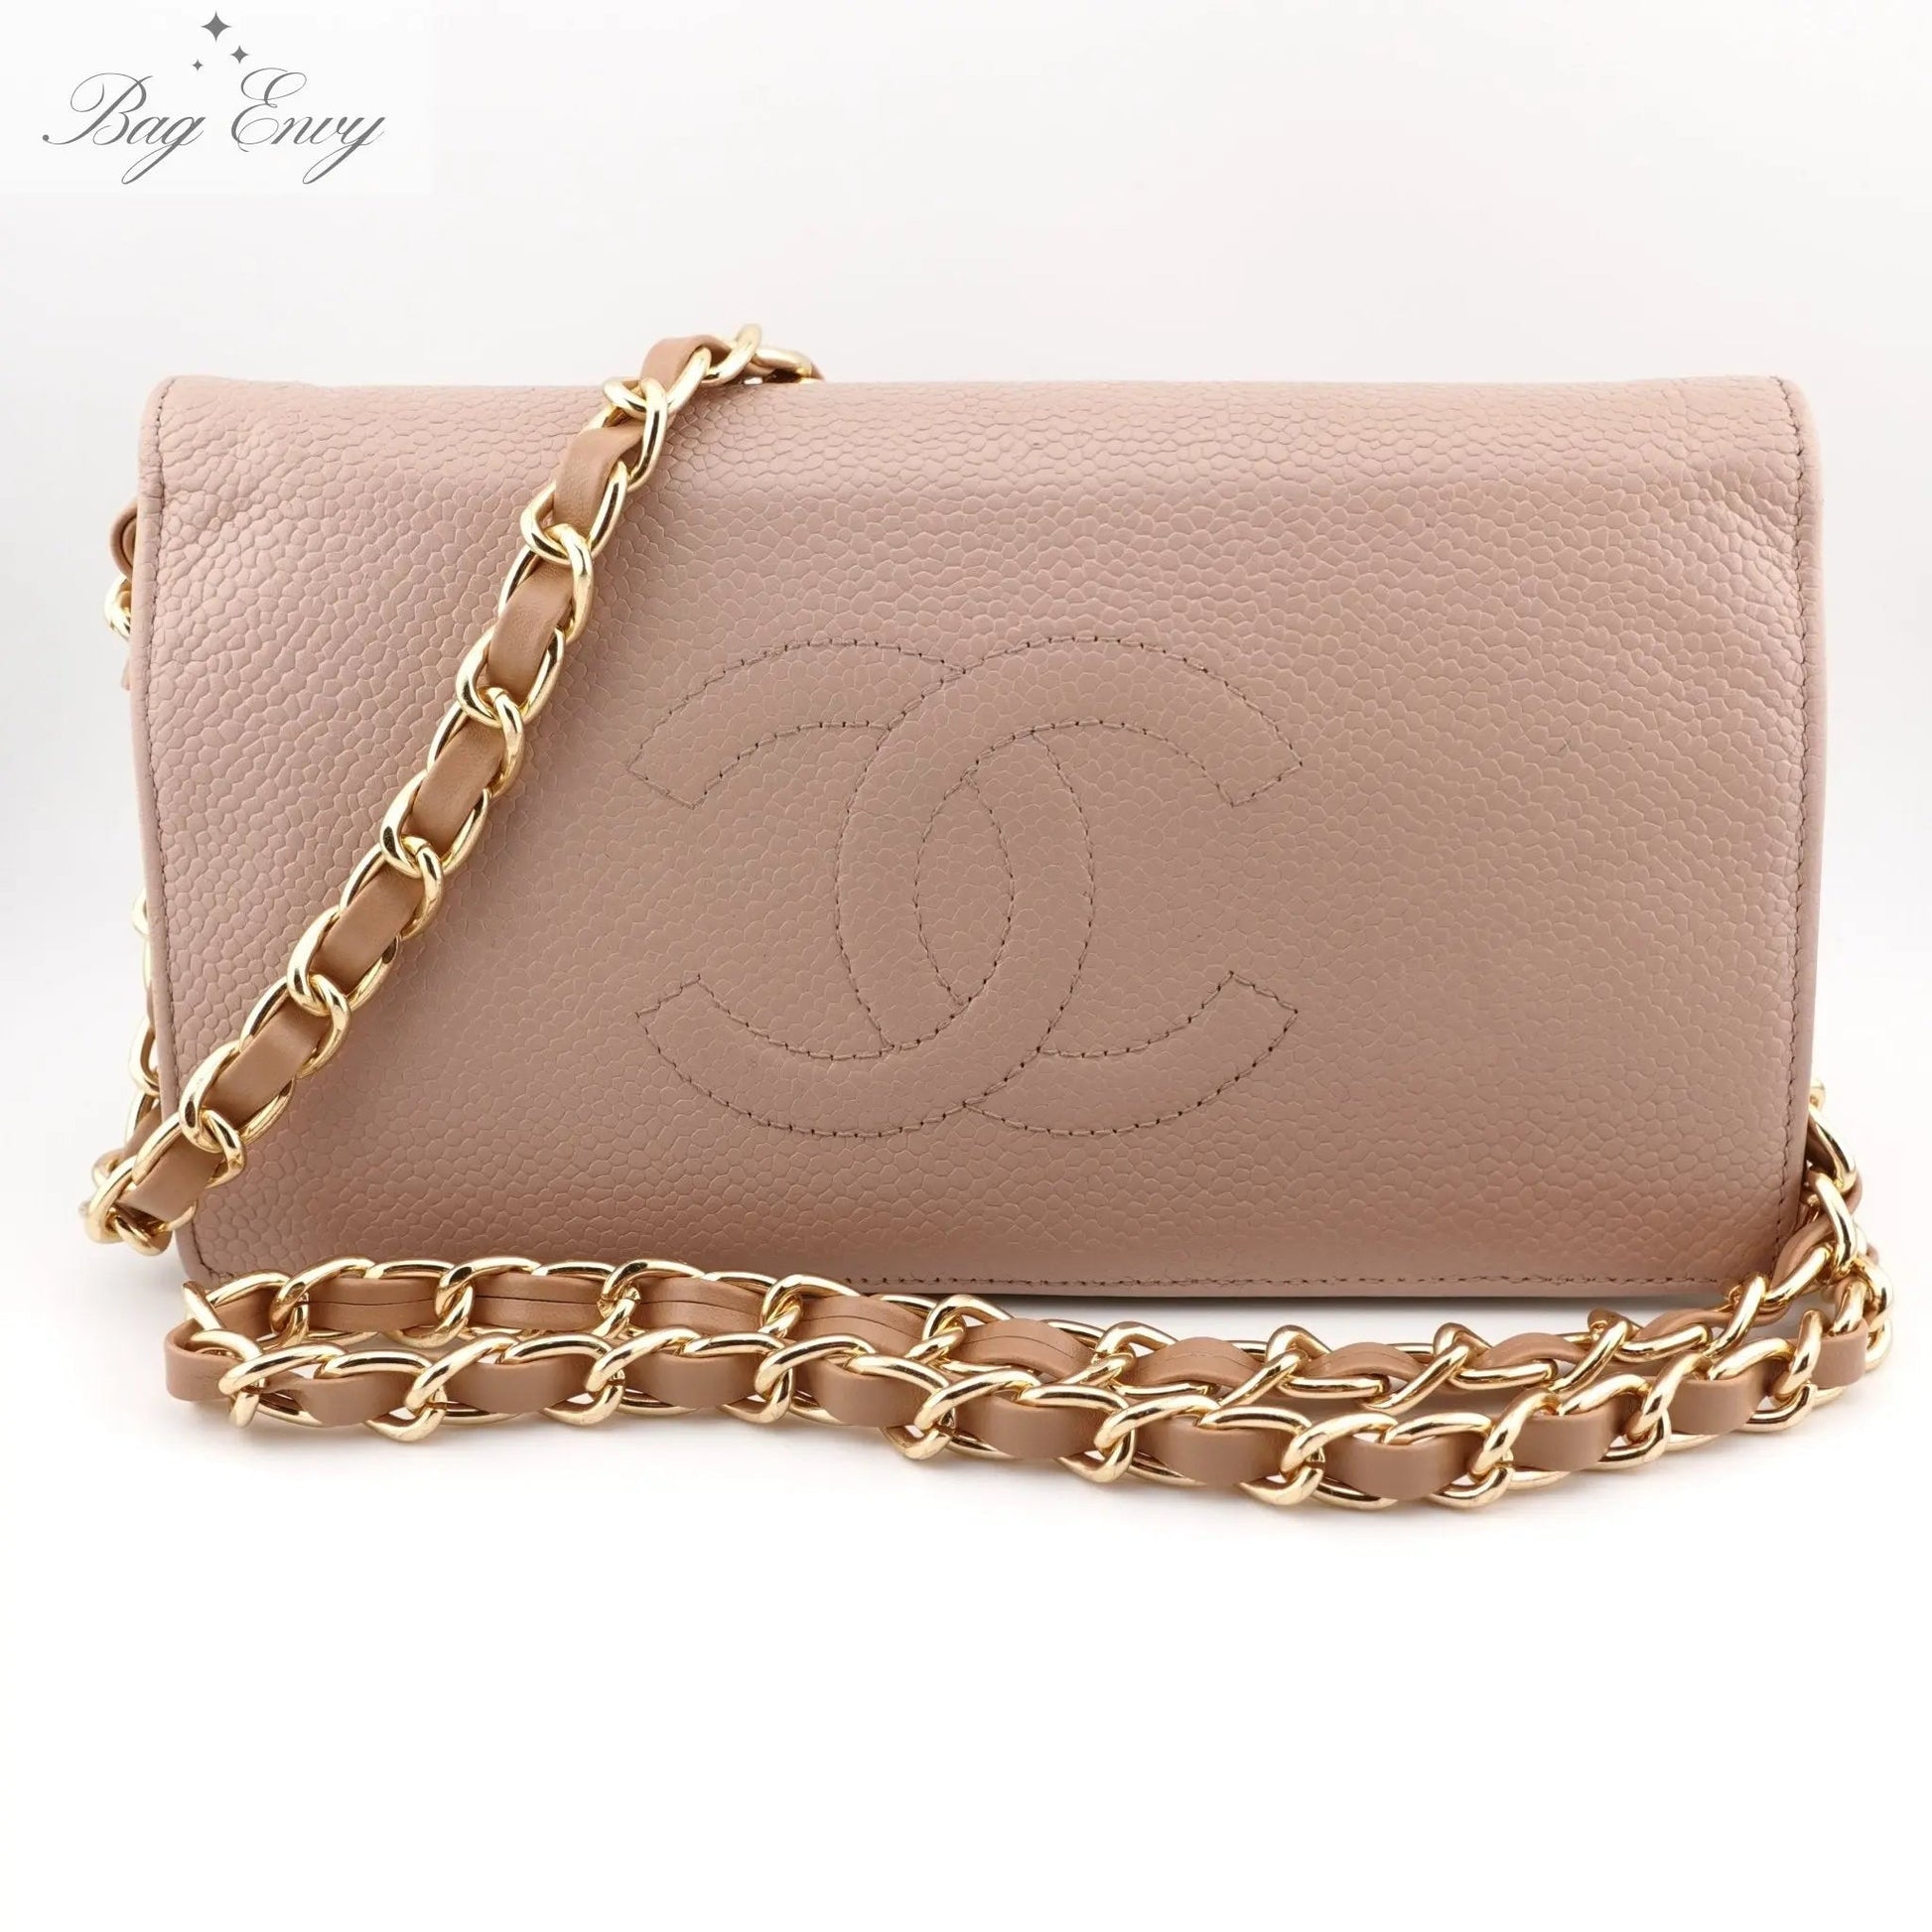 CHANEL Caviar Timeless Bifold Wallet on Chain - Bag Envy